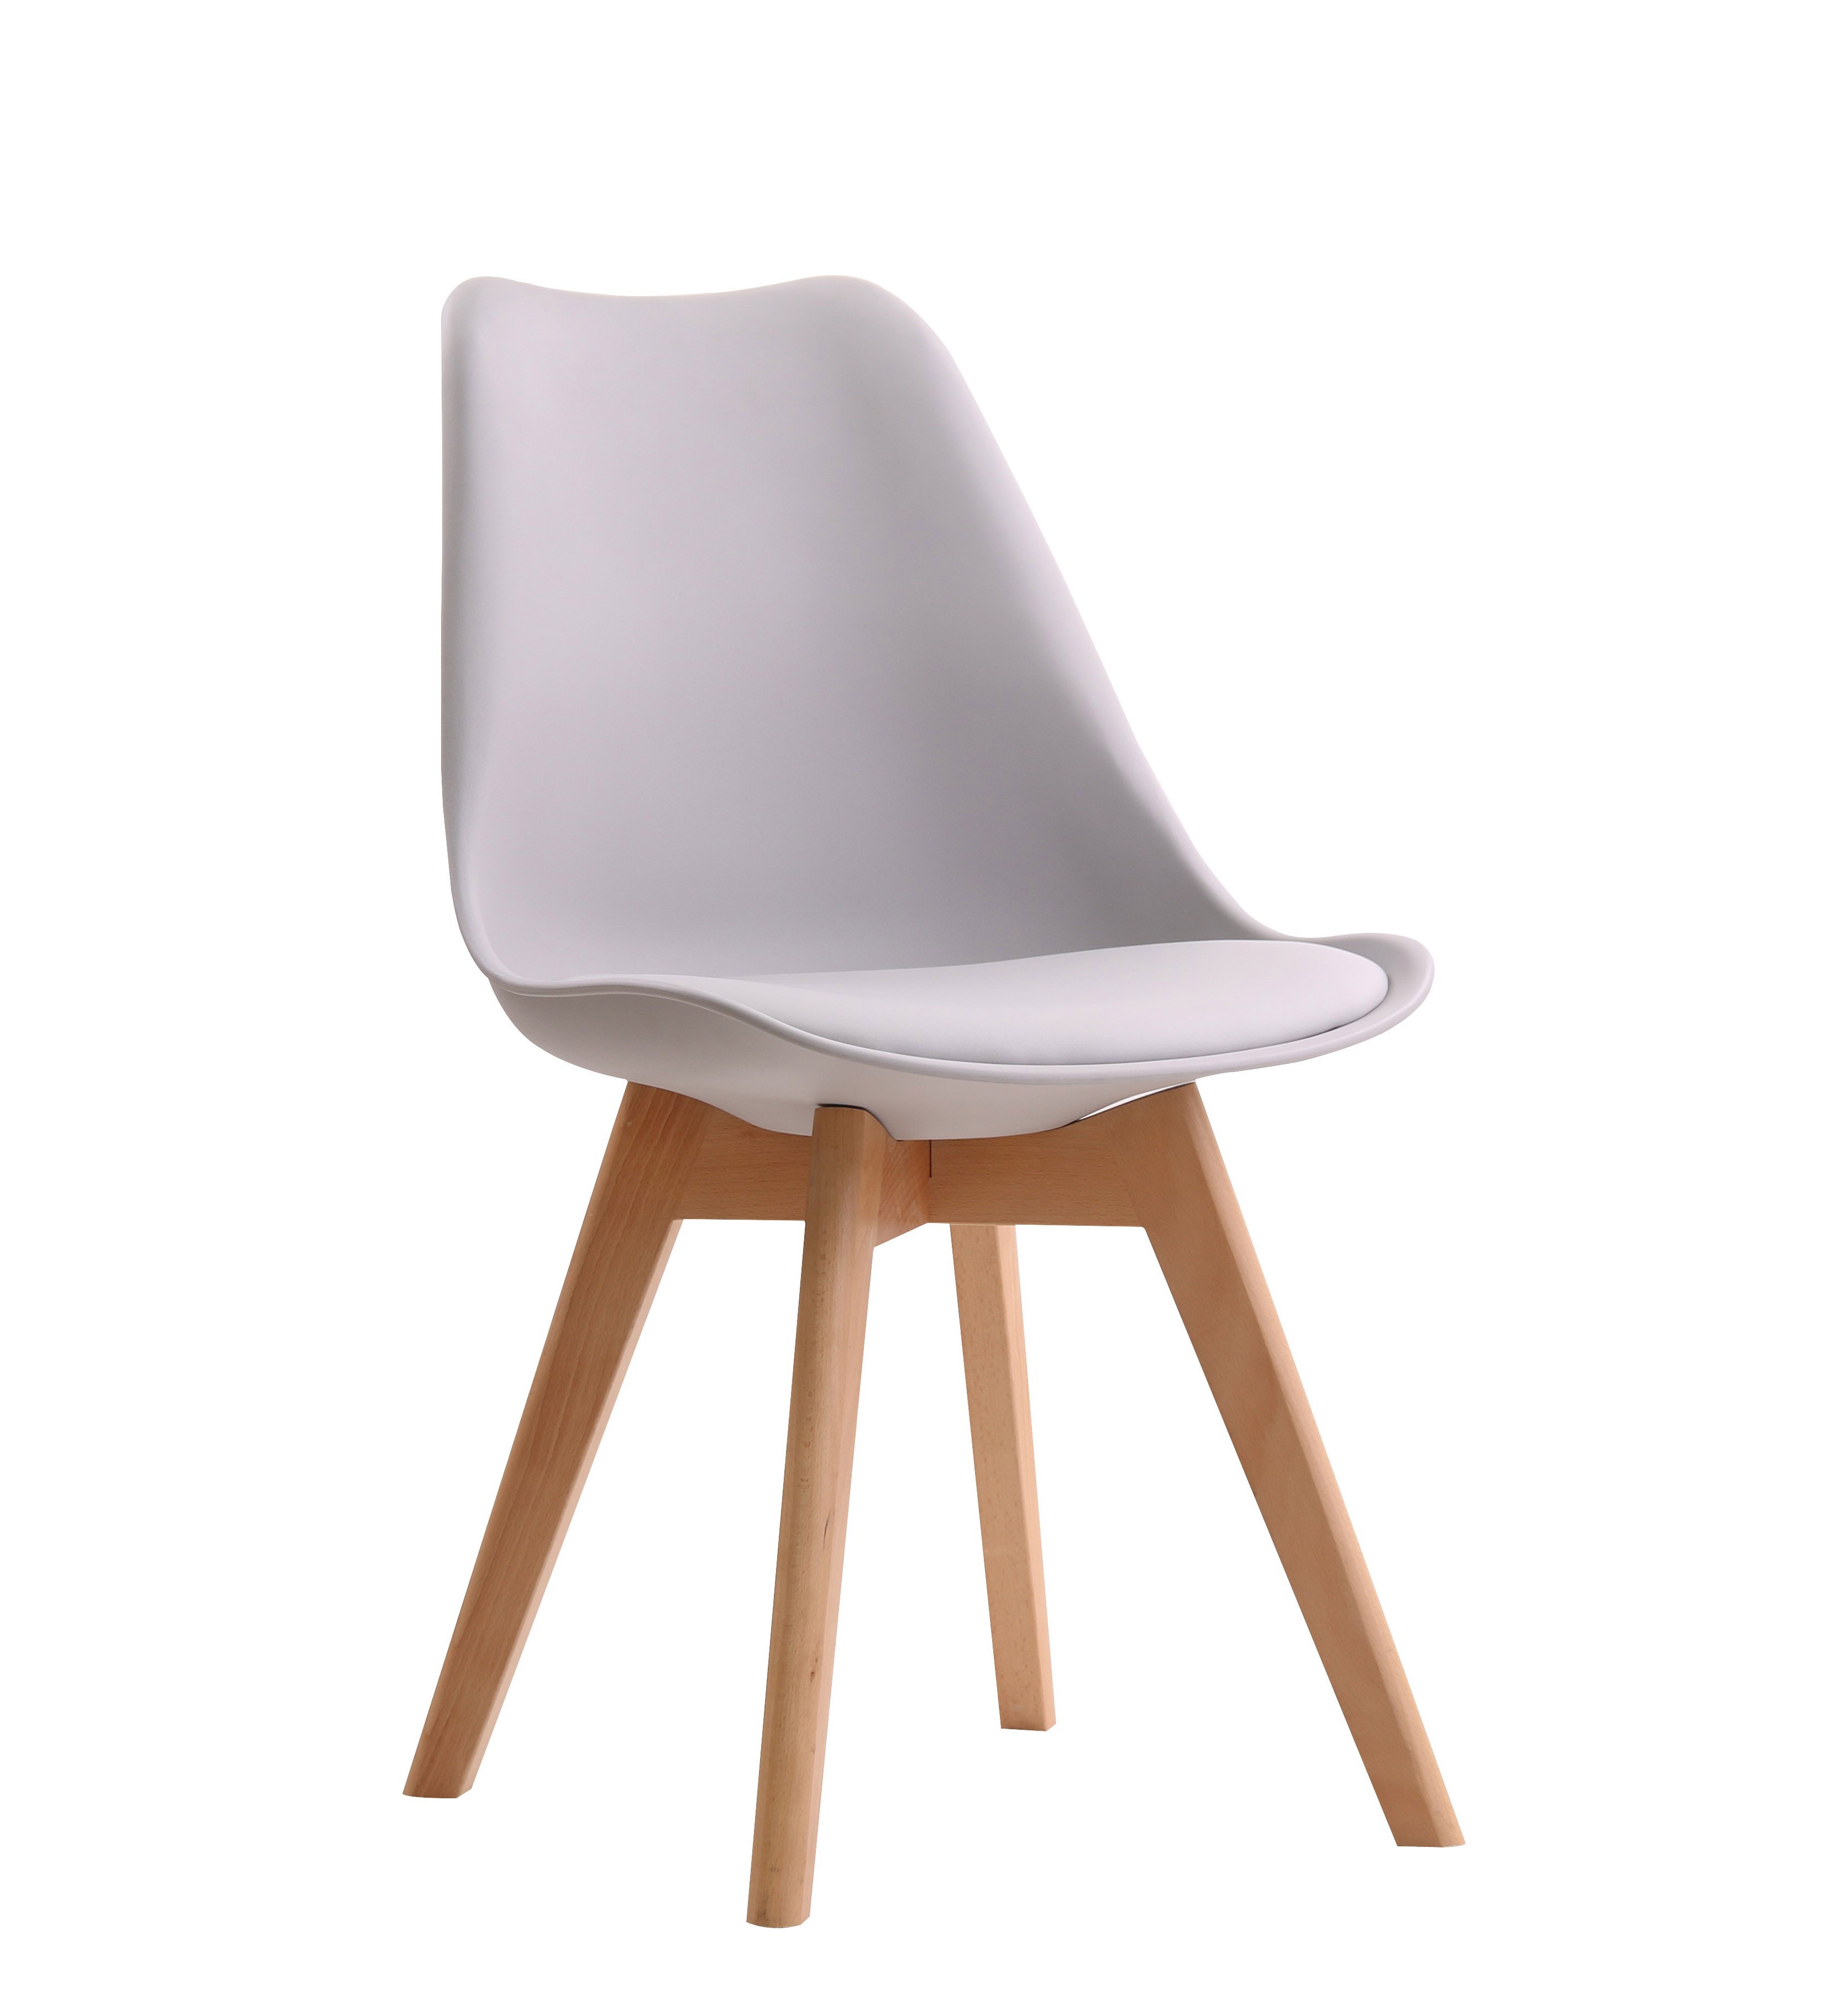 MARIA PP DINING CHAIR GREY